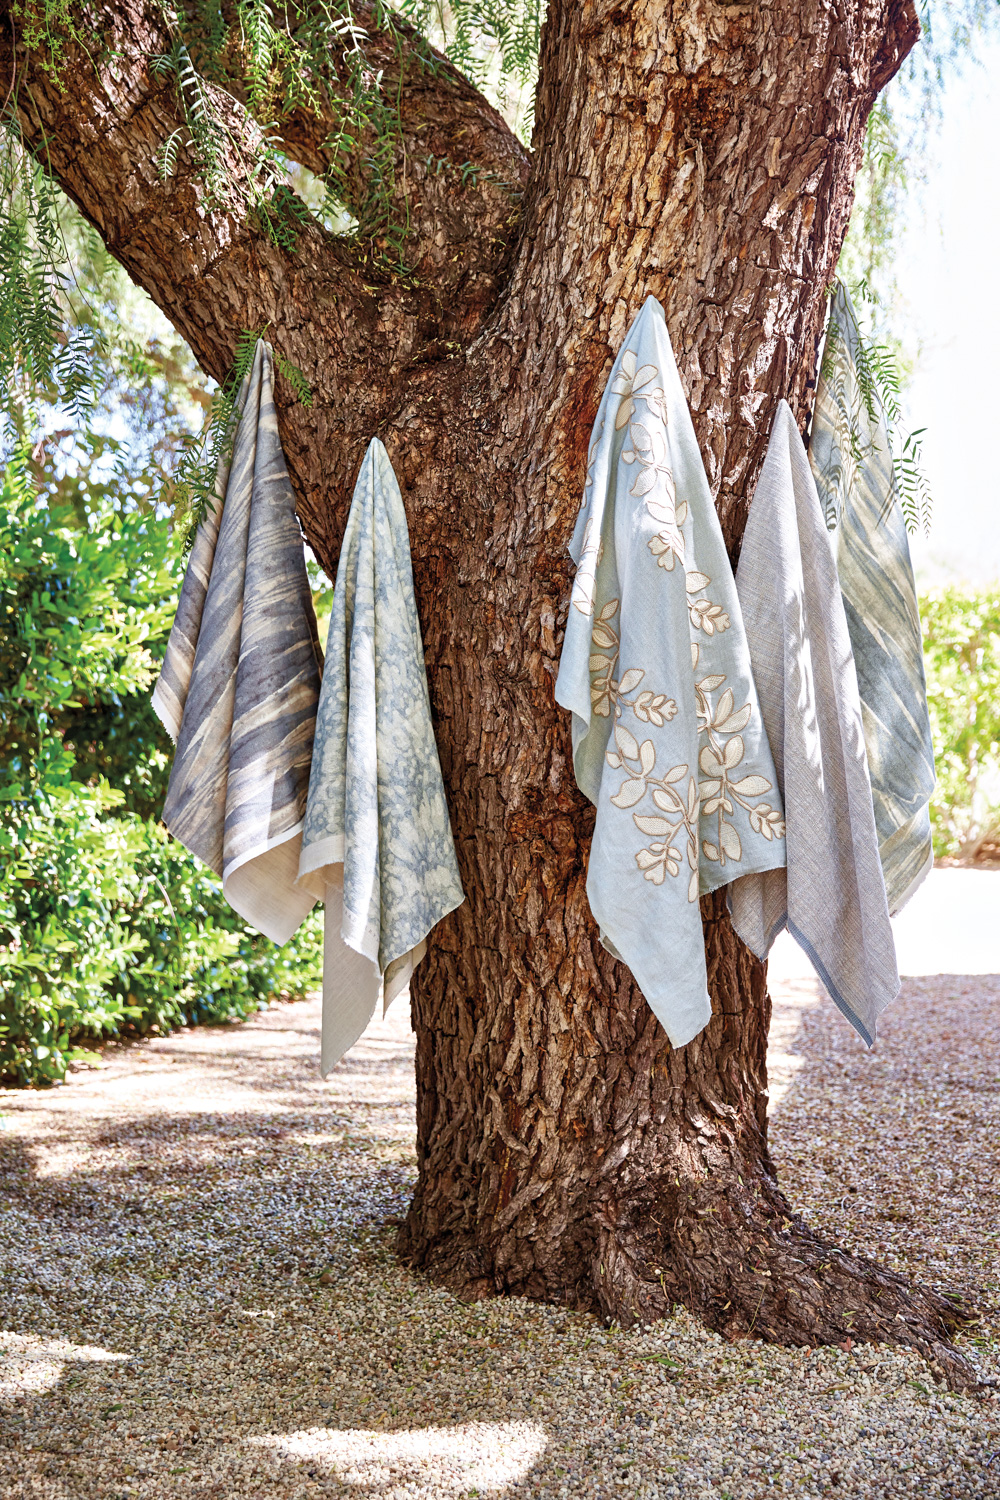 Barbara Barry x Kravet Ojai textiles in shades of blue hanging from a tree outdoors